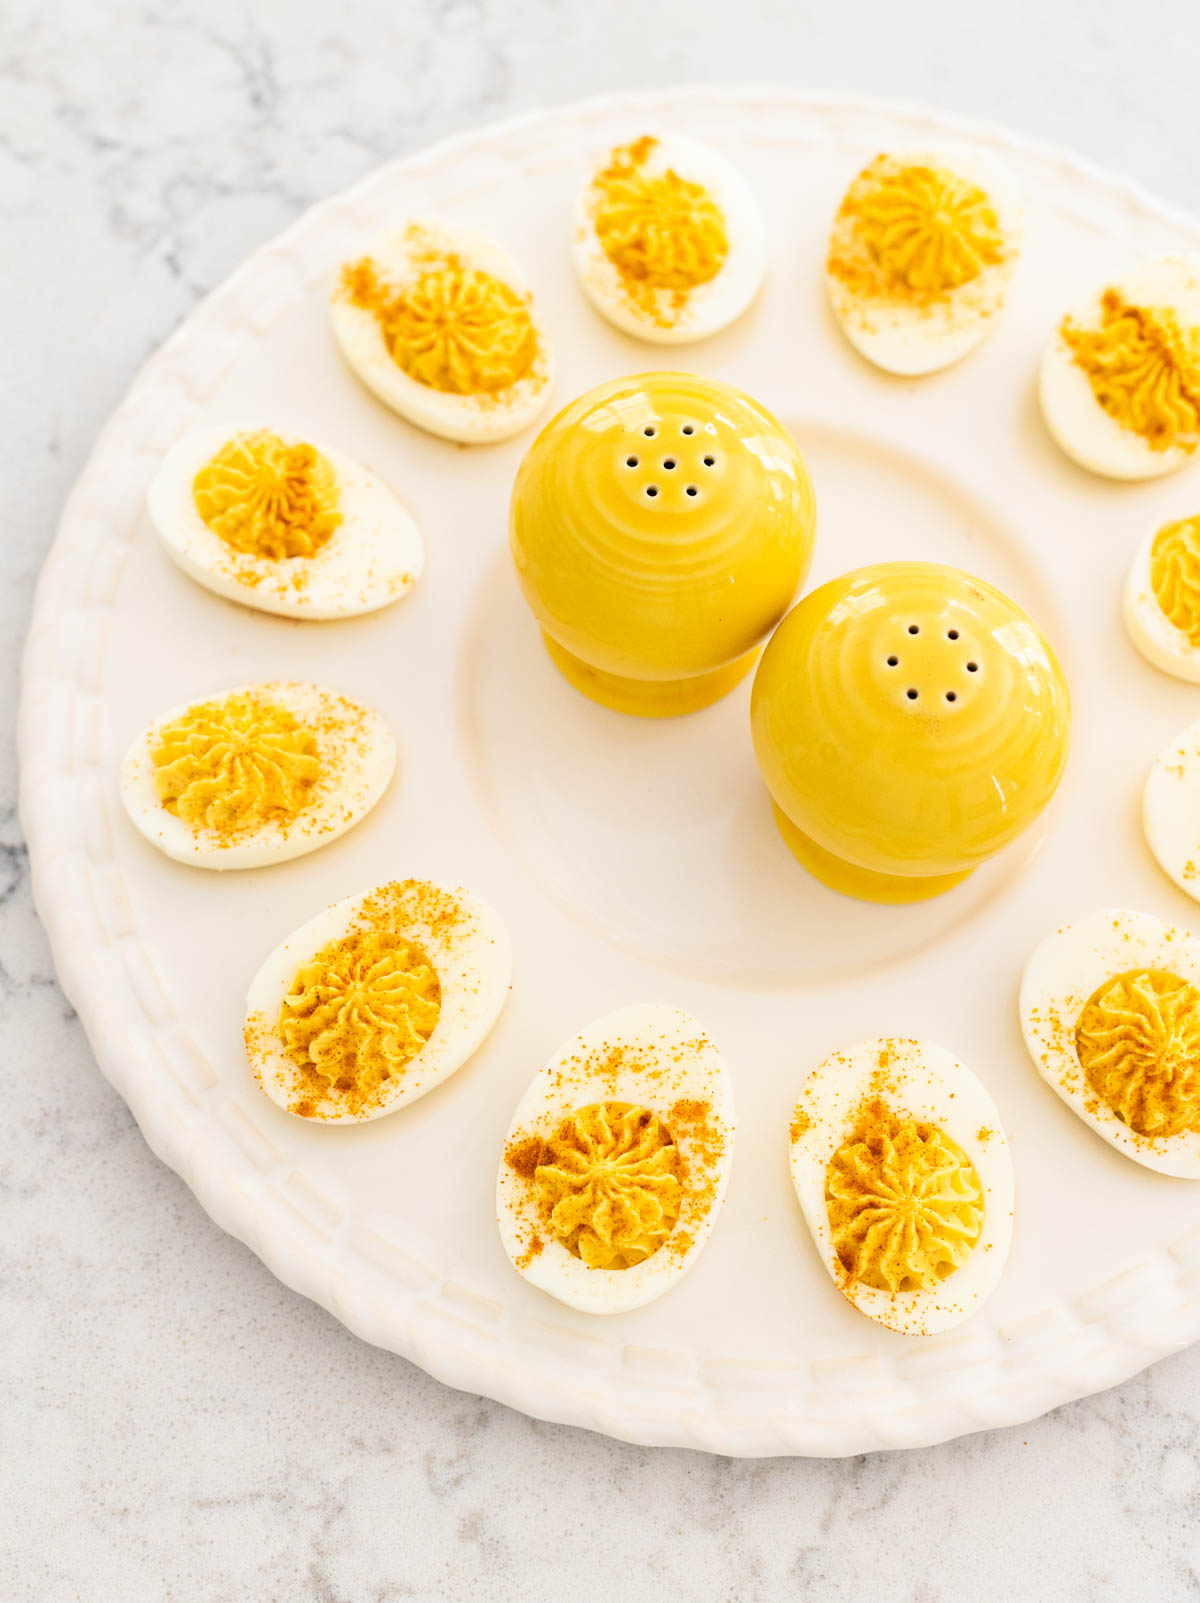 The egg platter is filled with deviled eggs and has a pair of yellow salt and pepper shakers in the middle.